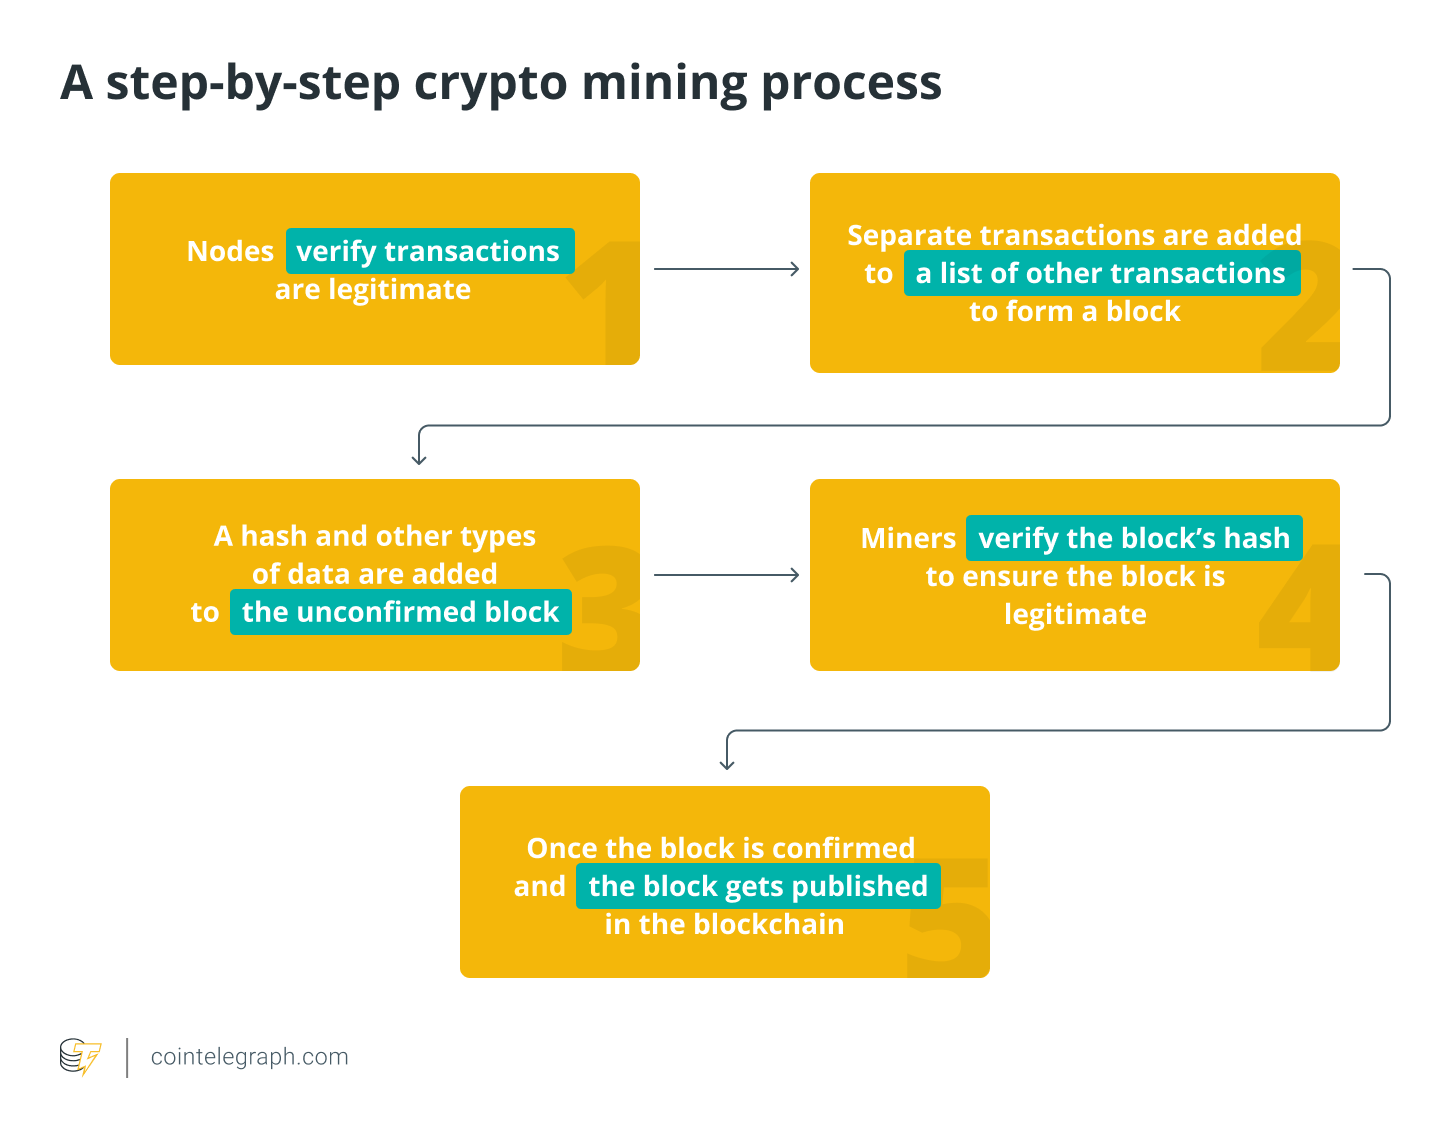 A step-by-step crypto mining process